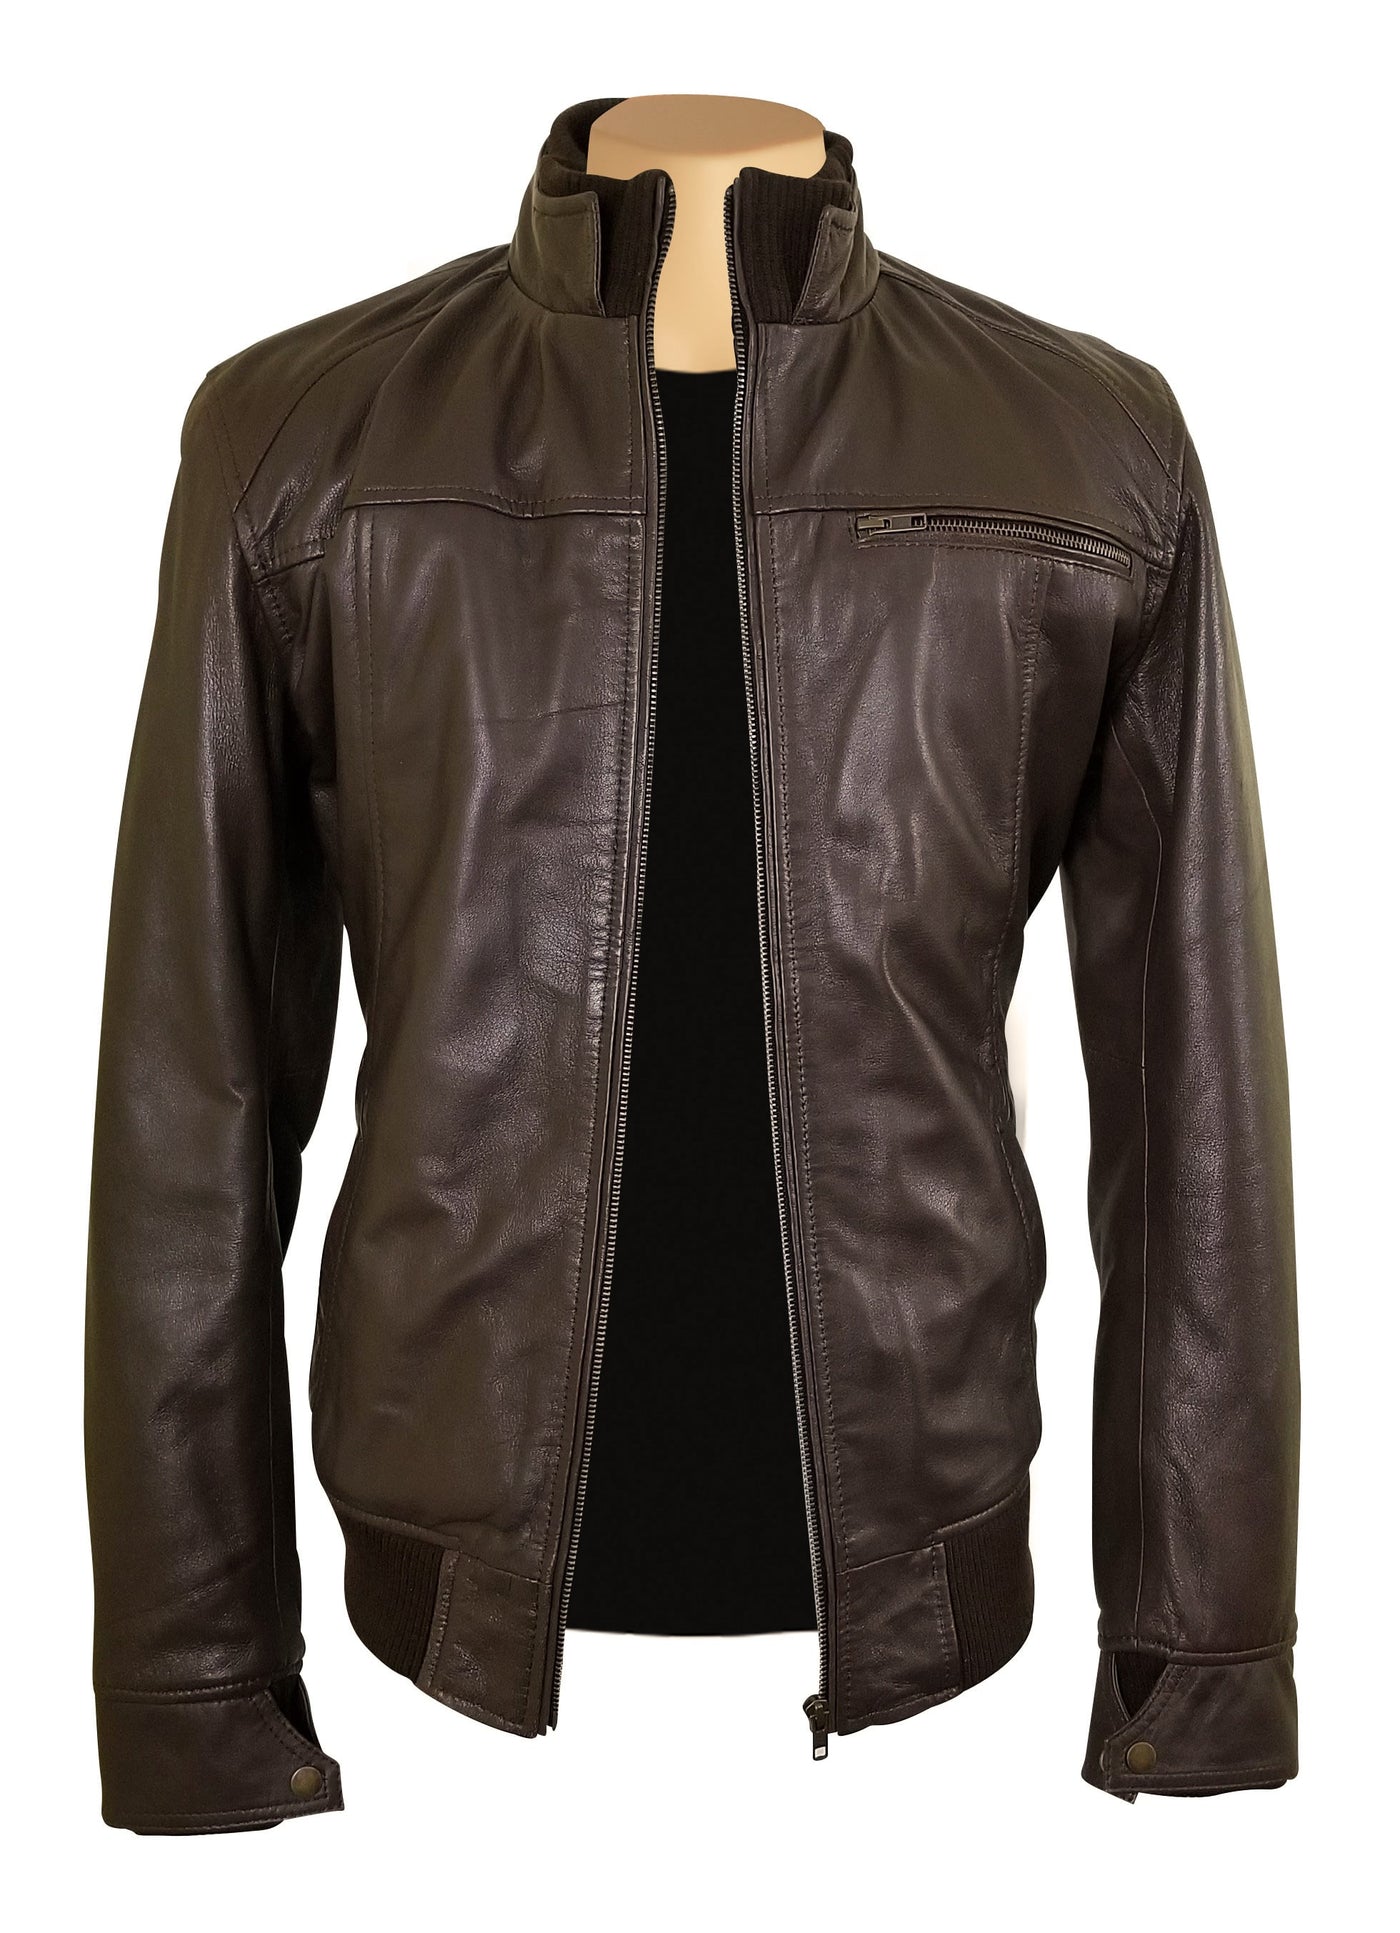 Relaxing With a ribbed neckline and a brown leather jacket